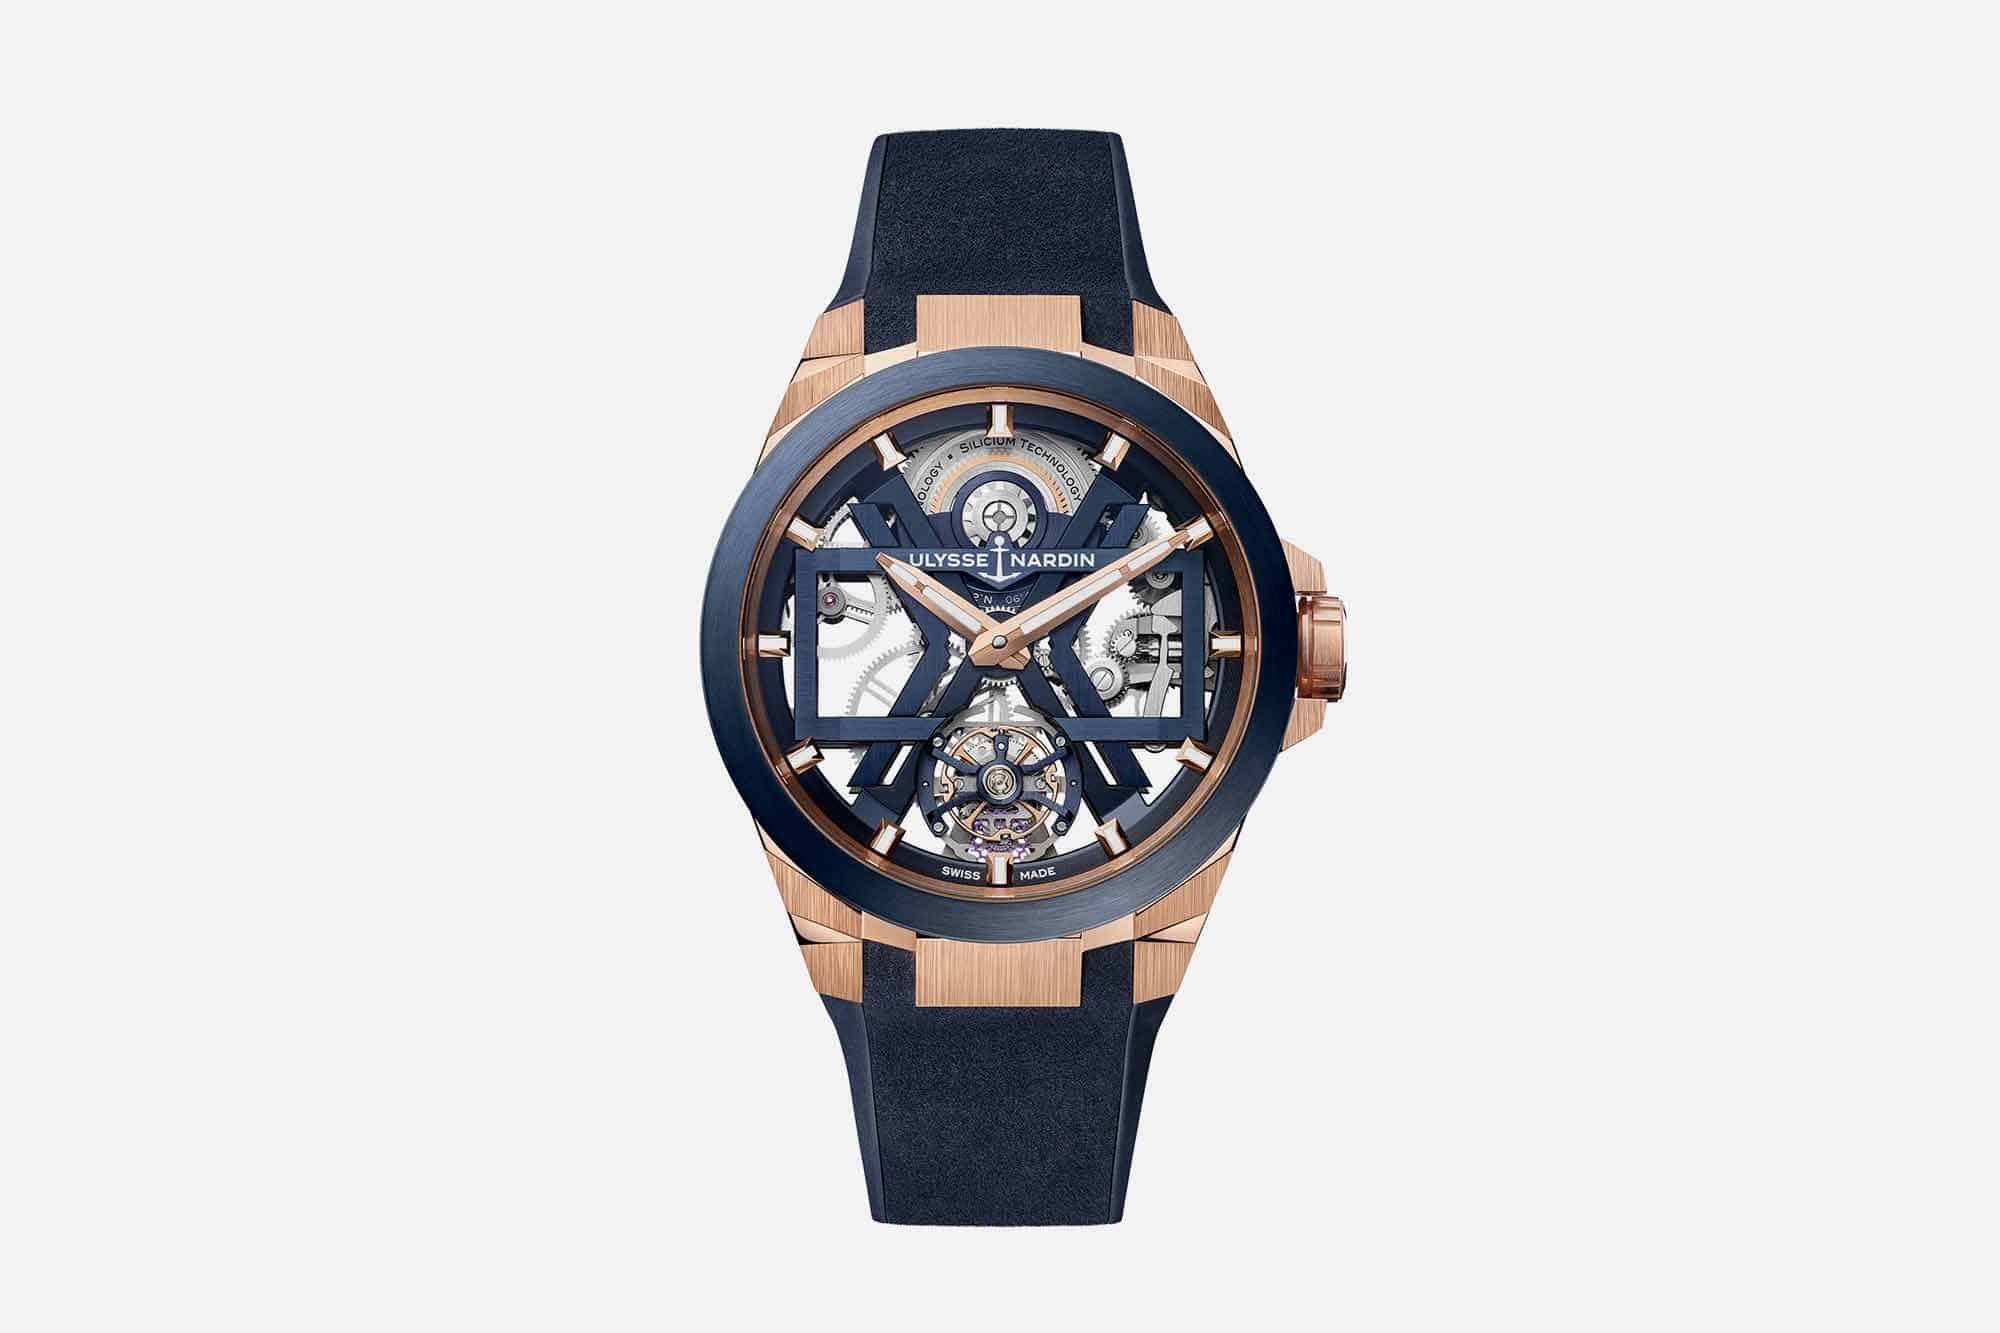 Ulysse Nardin Really Knows How to Name a Watch. Exhibit A: the Blast Blue & Gold